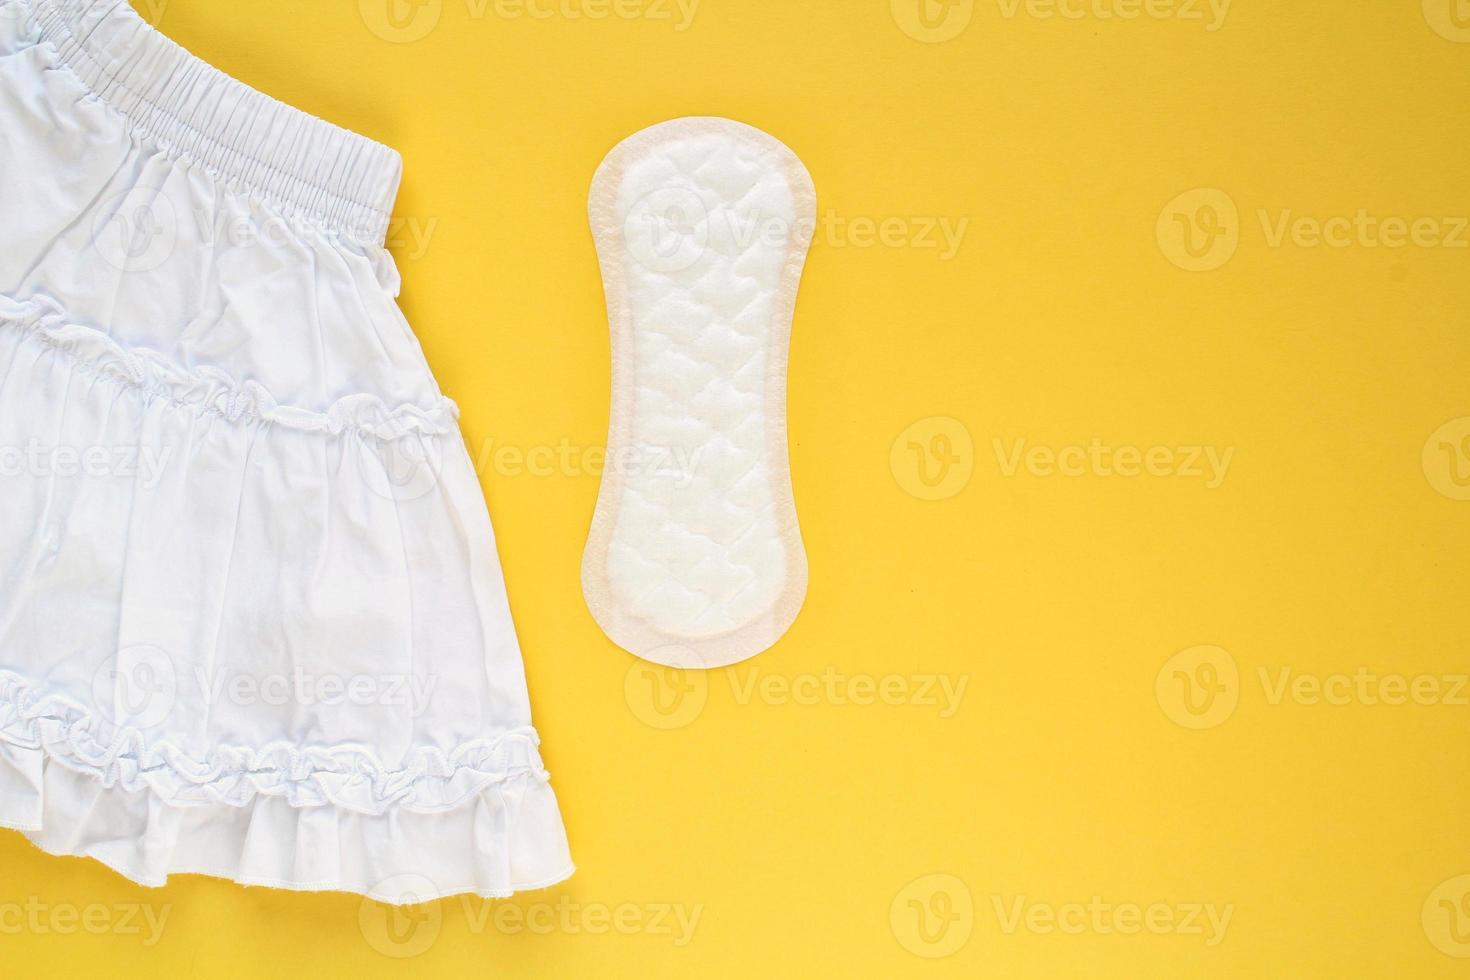 White skirt and woman sanitary pad on yellow background. Female menstruation cycle period. Hygiene concept. Linen and health protection idea. Copy space photo